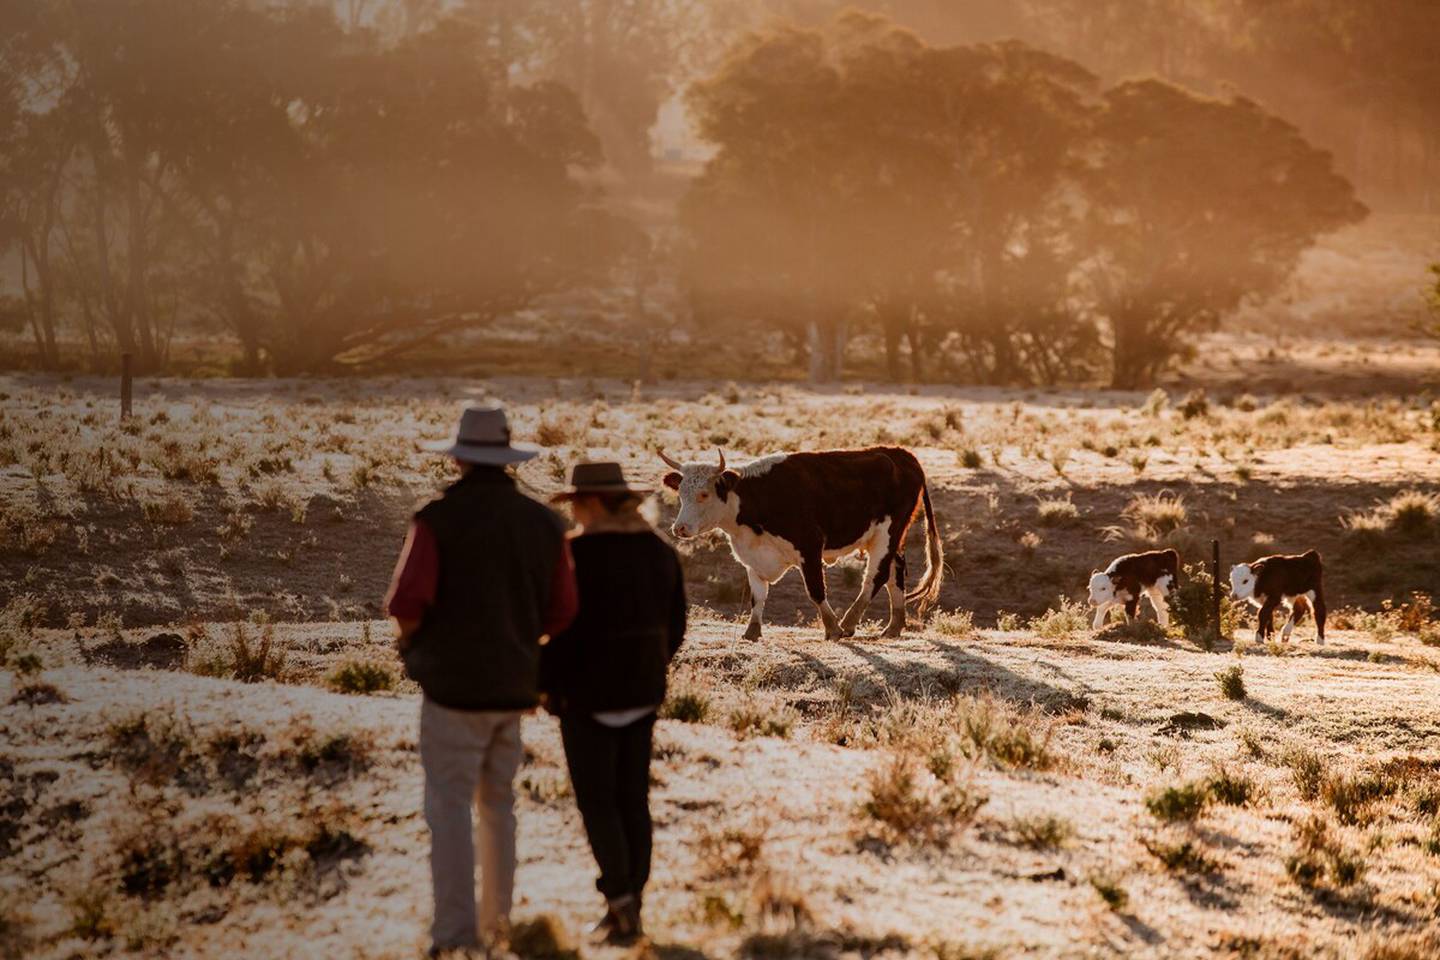 Spending New Year on a farm was the most popular 'unique stay' on Airbnb this new year. Photo: Airbnb